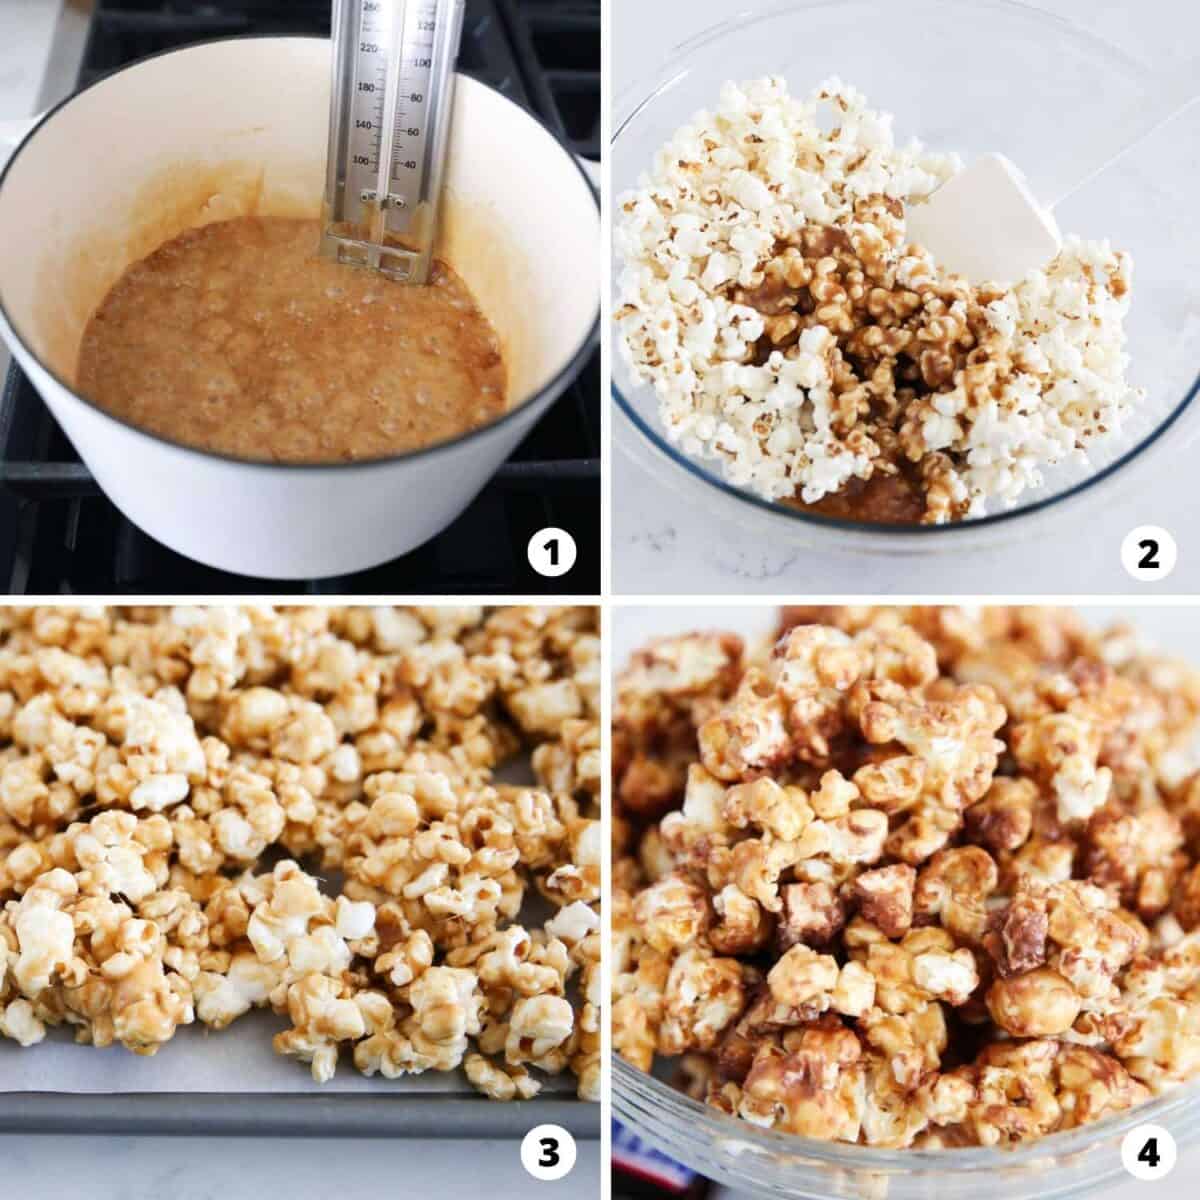 The process of making snickers popcorn in a four step photo collage.